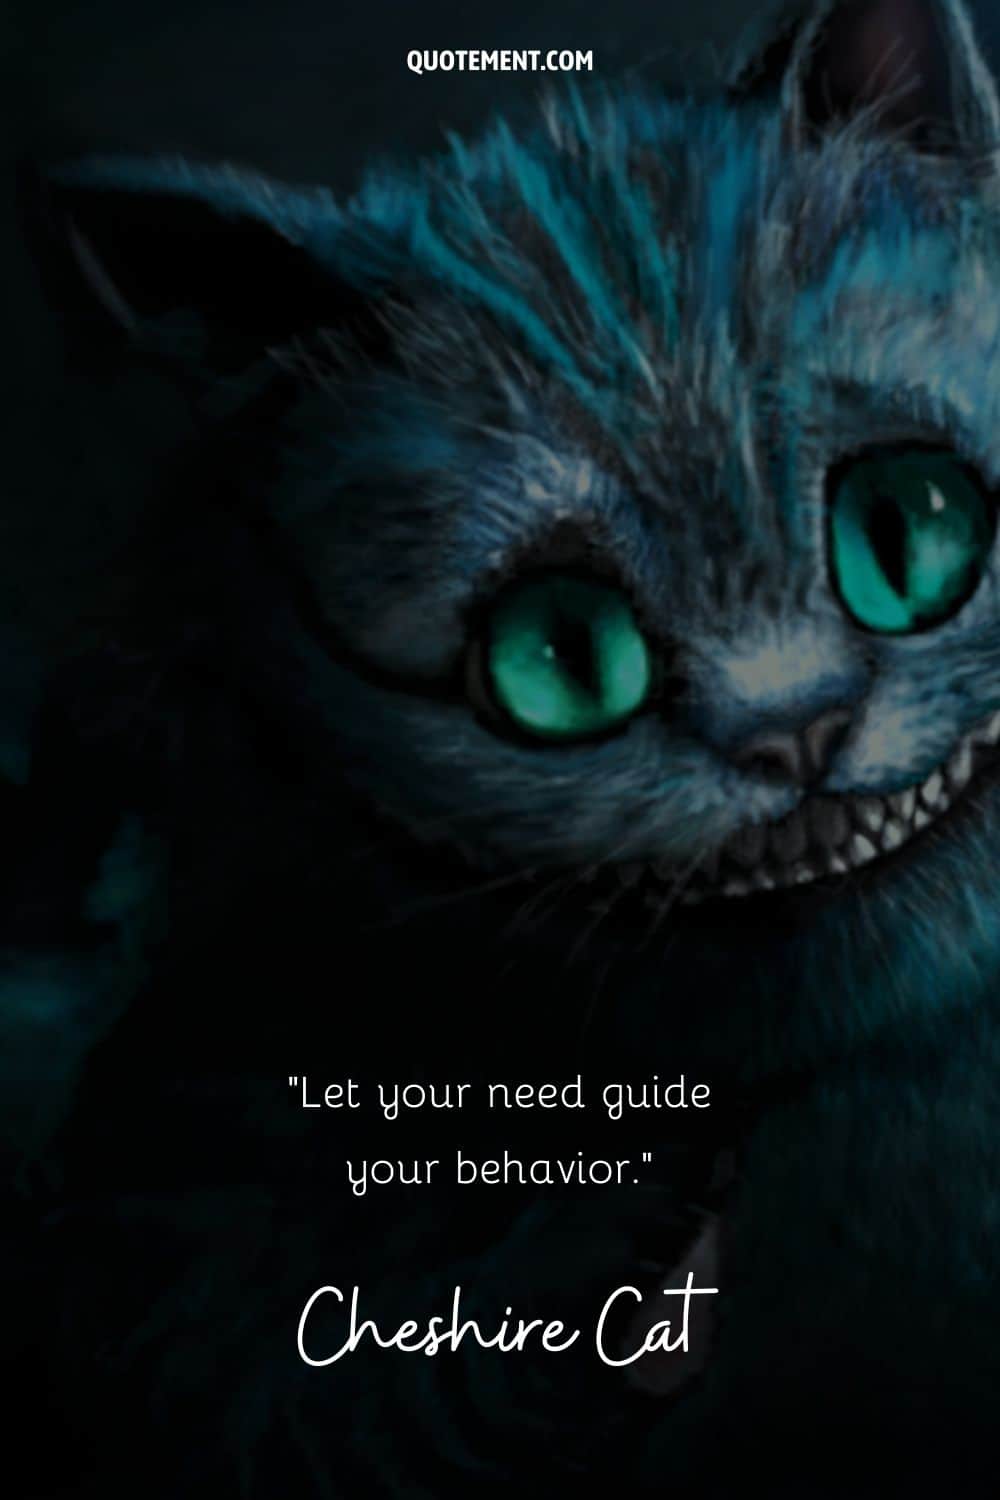 Brilliant quote from the Cheshire Cat and its image in the background, too